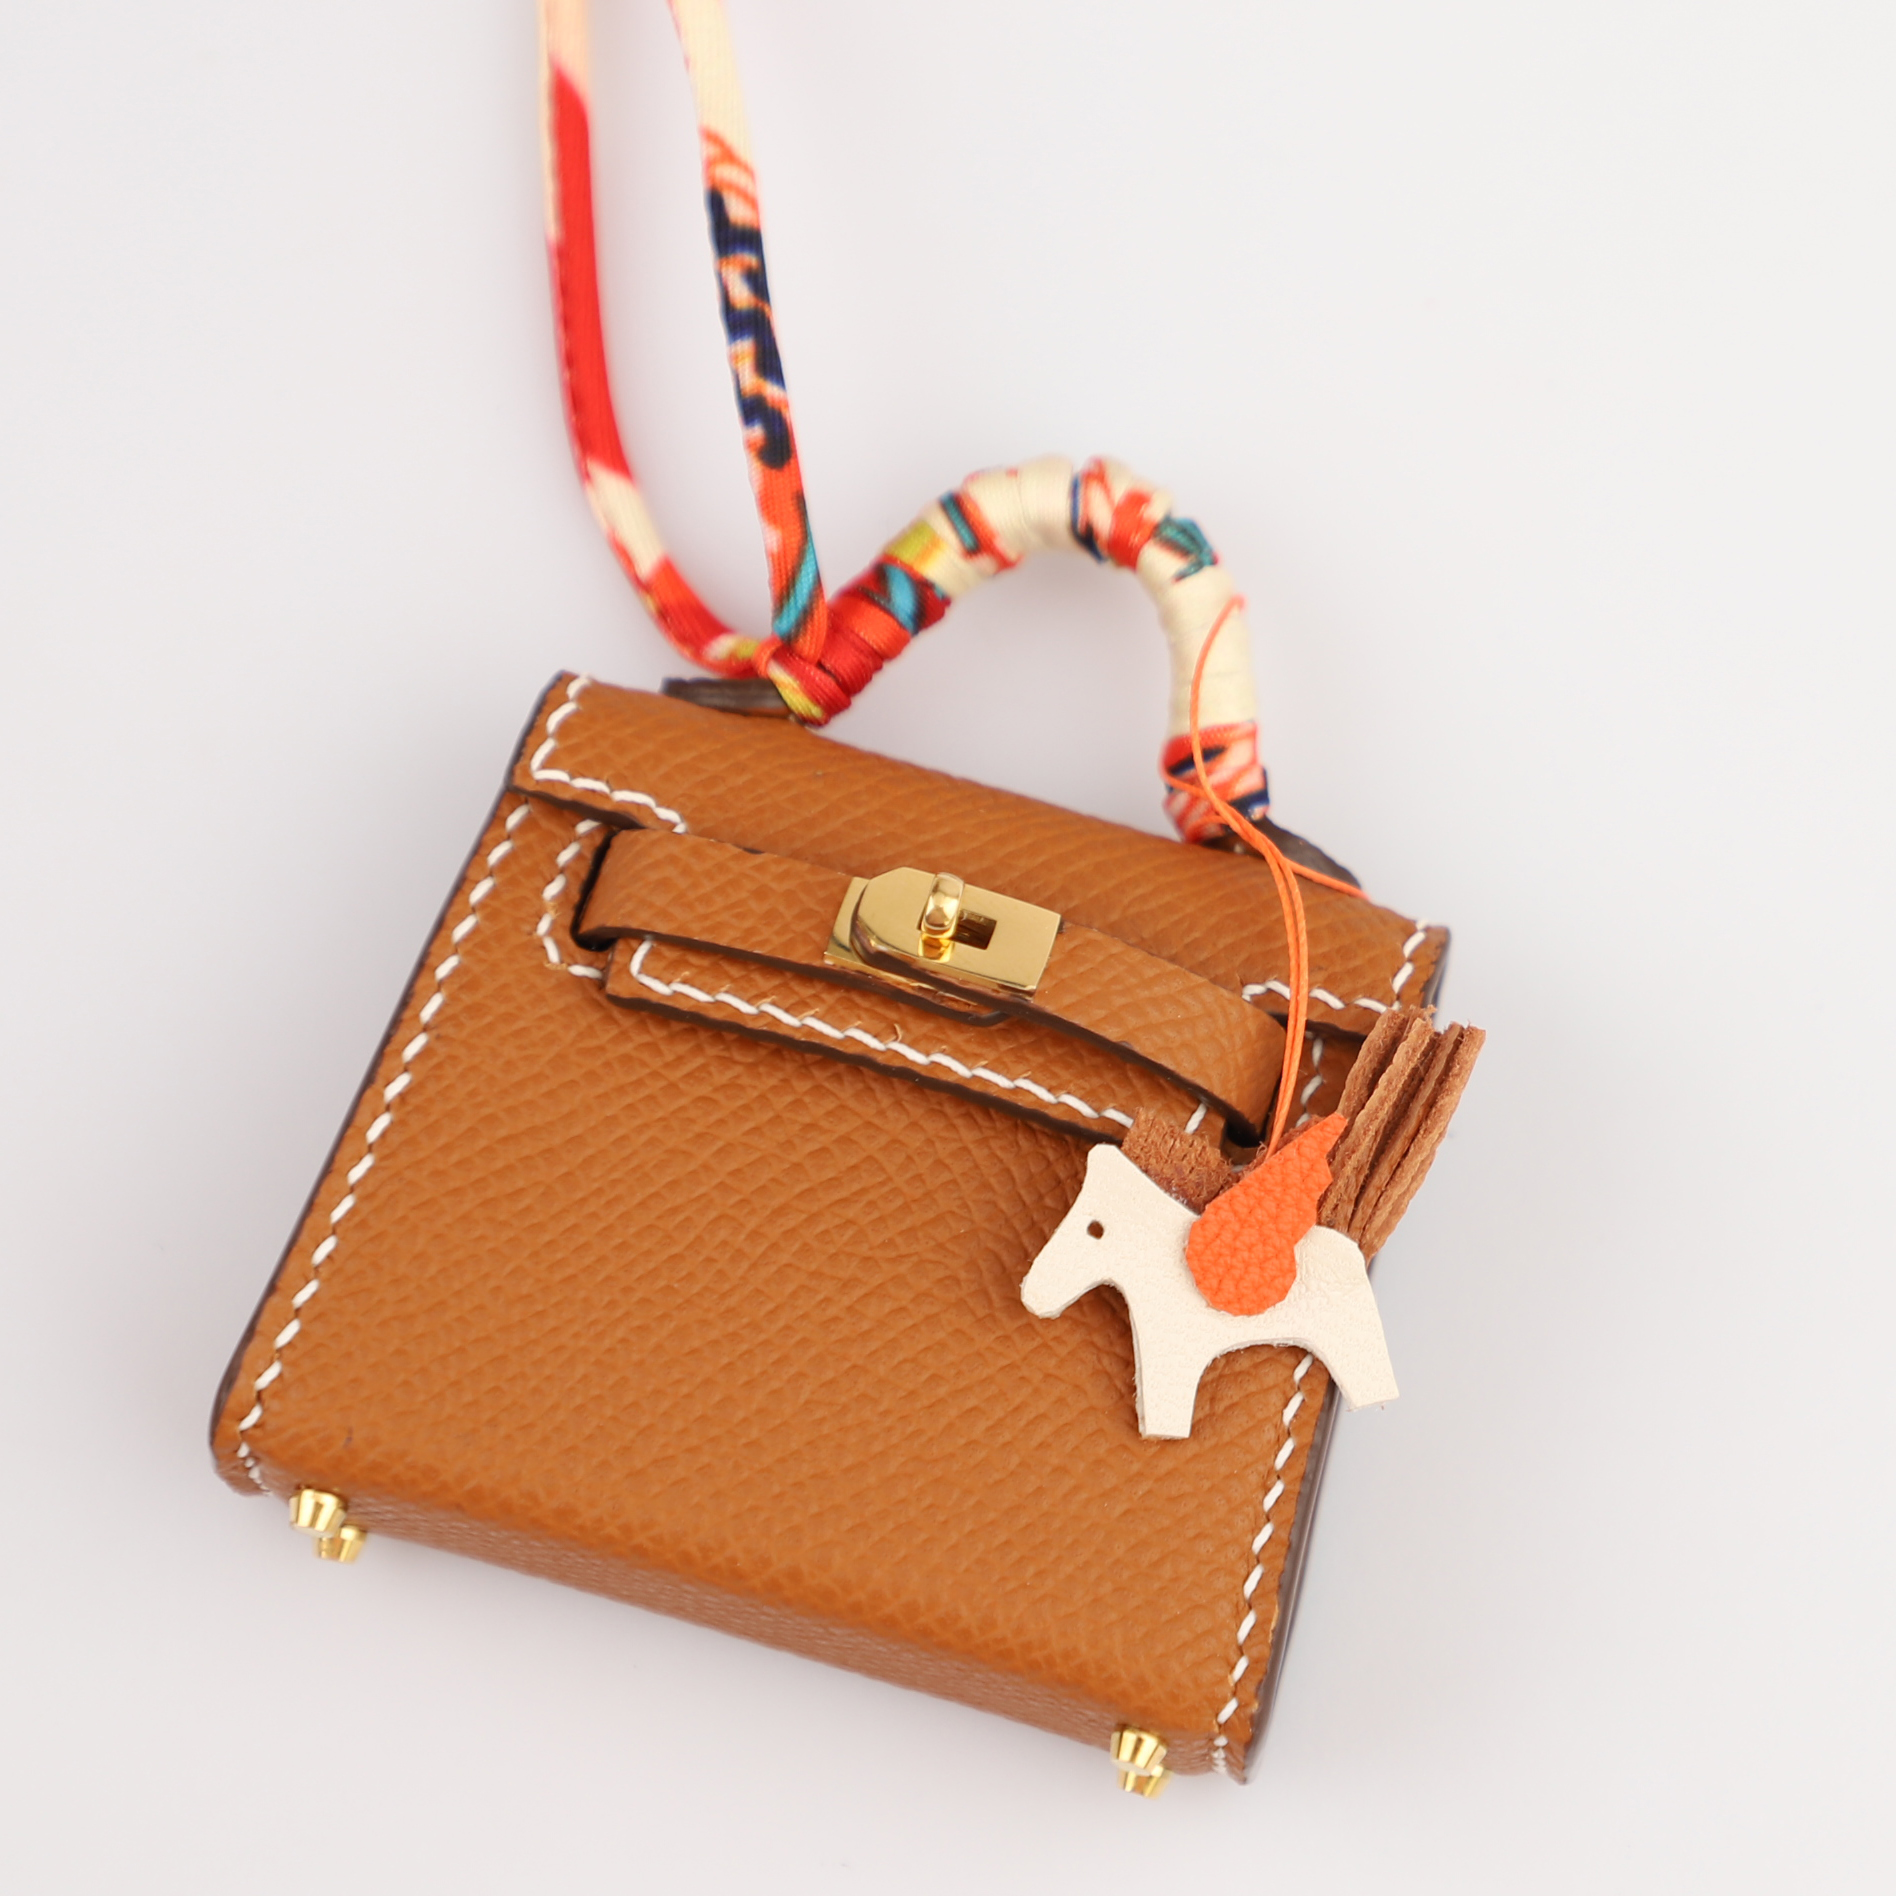 Hermès Kelly Twilly Bag Charm With Printed Silk Strap in Red